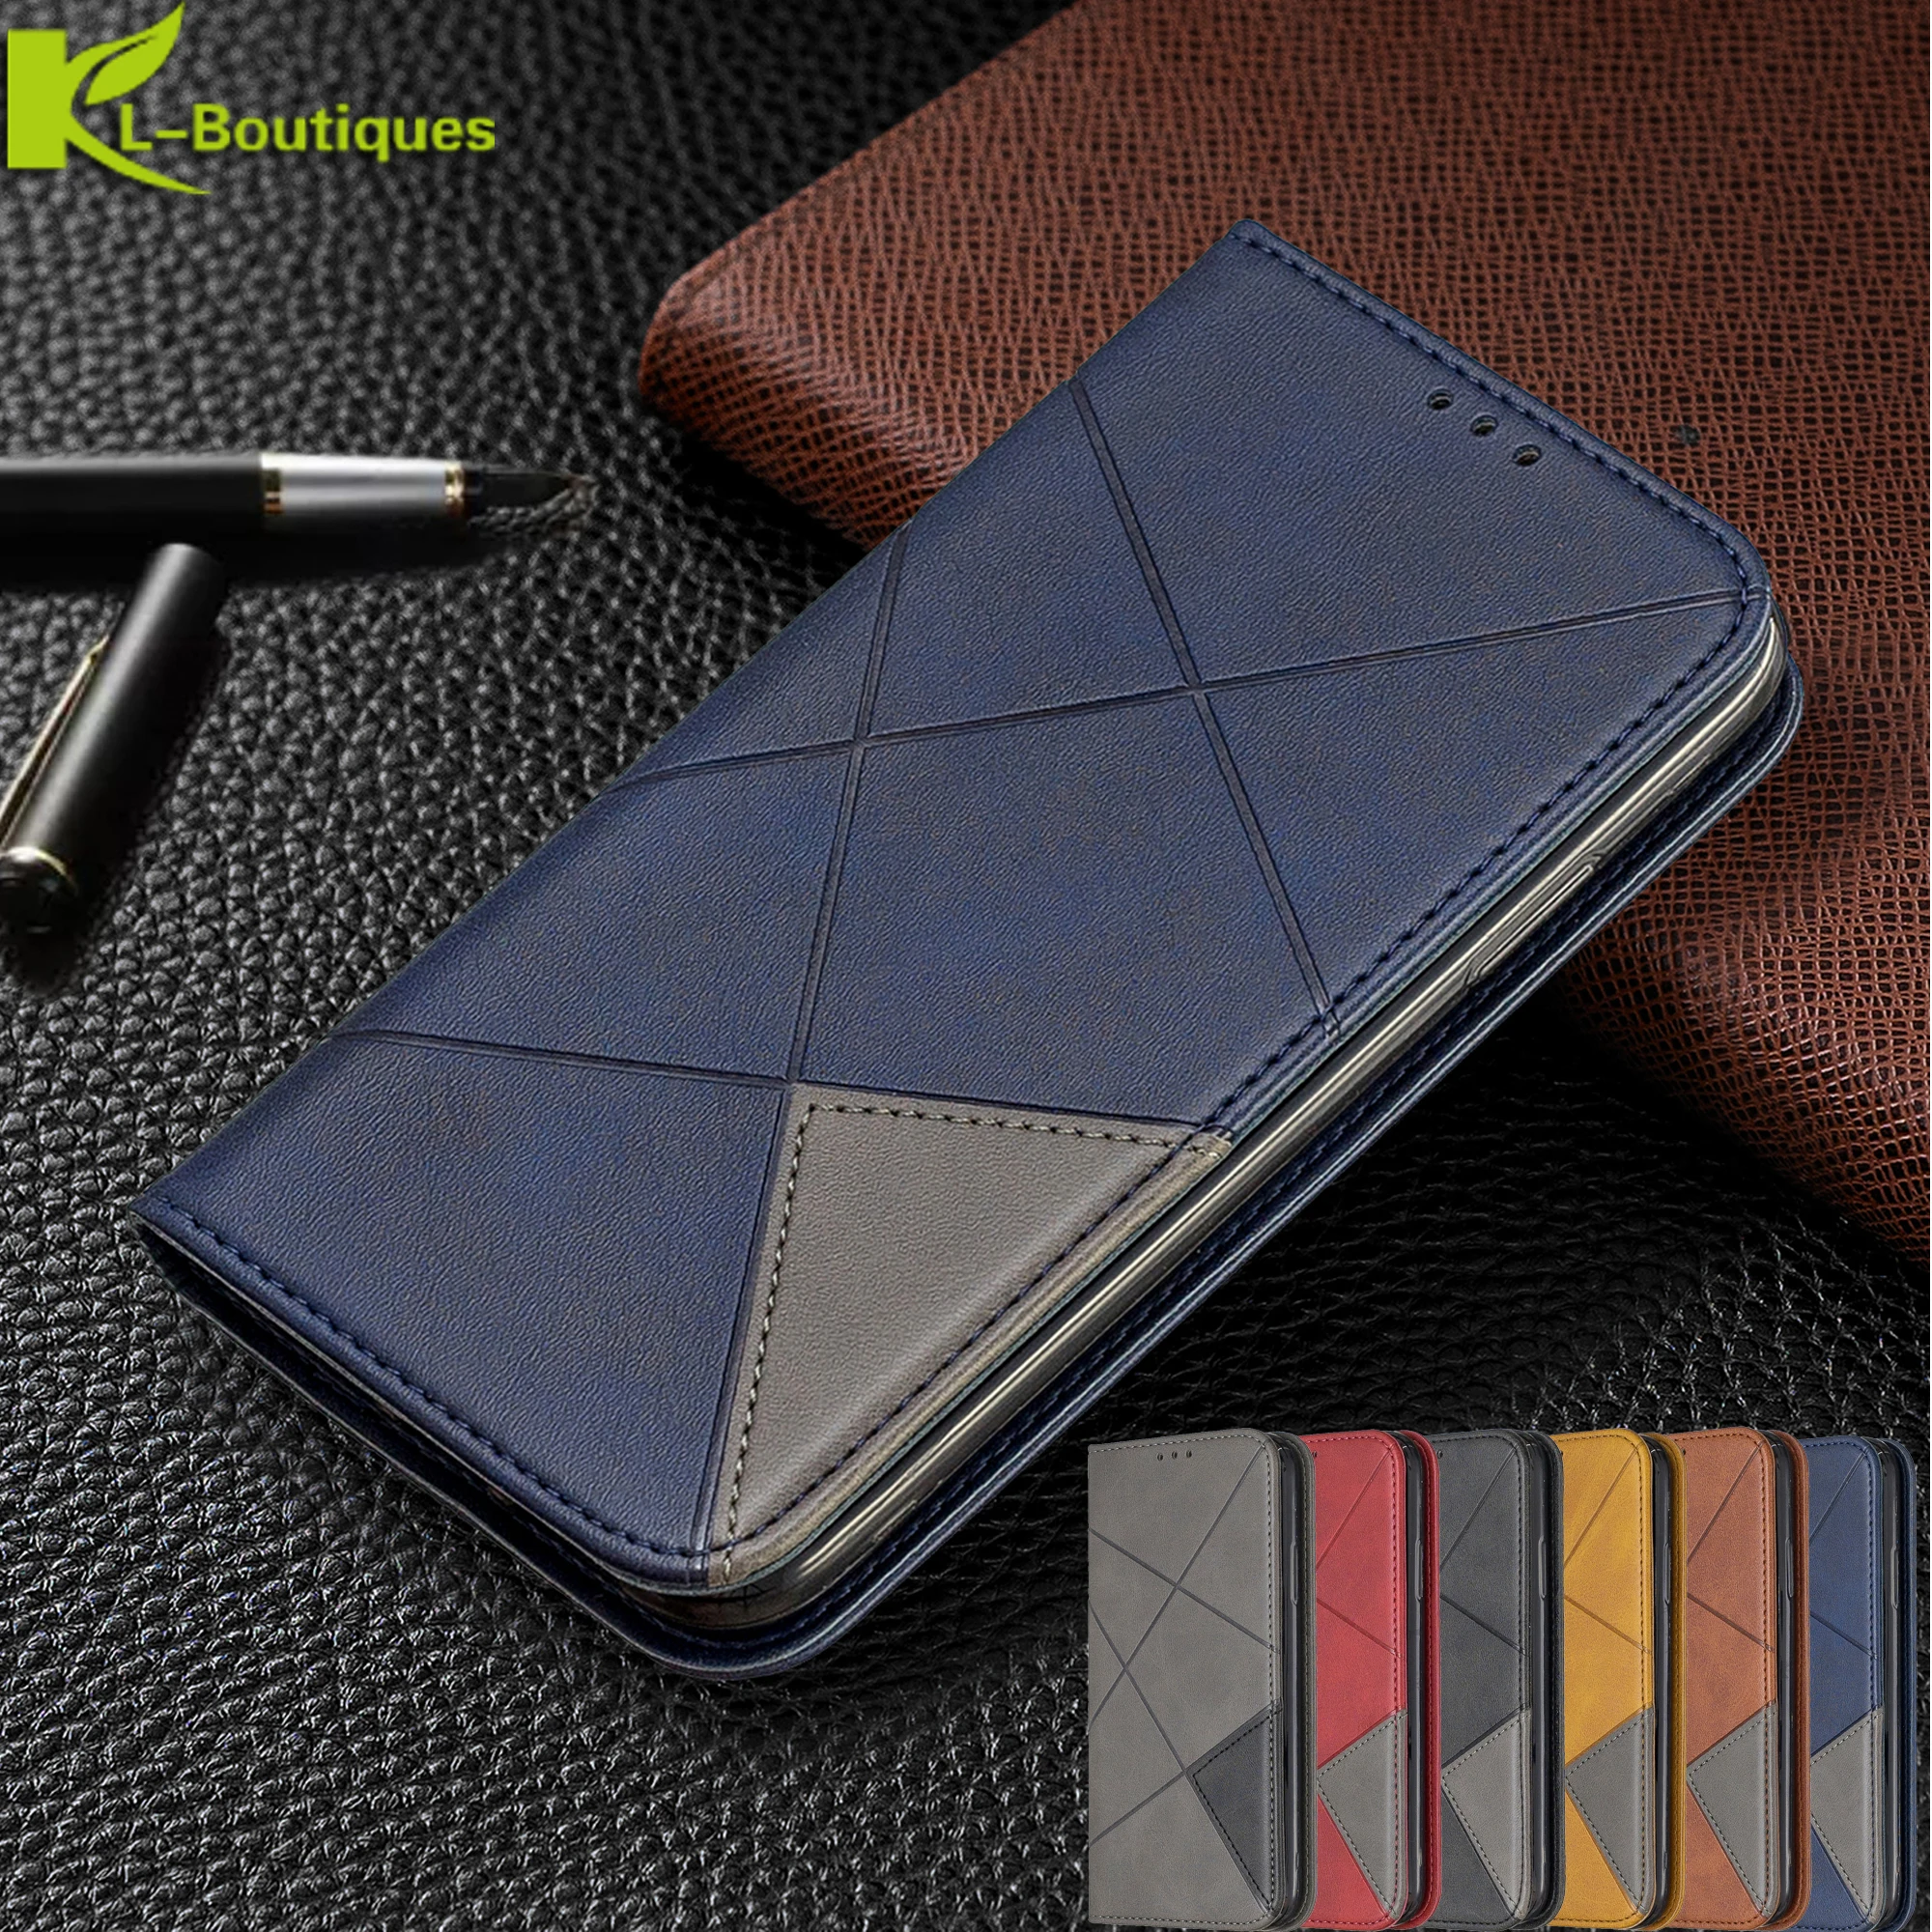 Honor 8A Case Huawei Honor 8S 10I 20i 10Lite 9X 9xpro 7A 7C Pro Y6 Y7 2018 2019 y52019 P30 Cover Book Stand Vintage Leather Capa